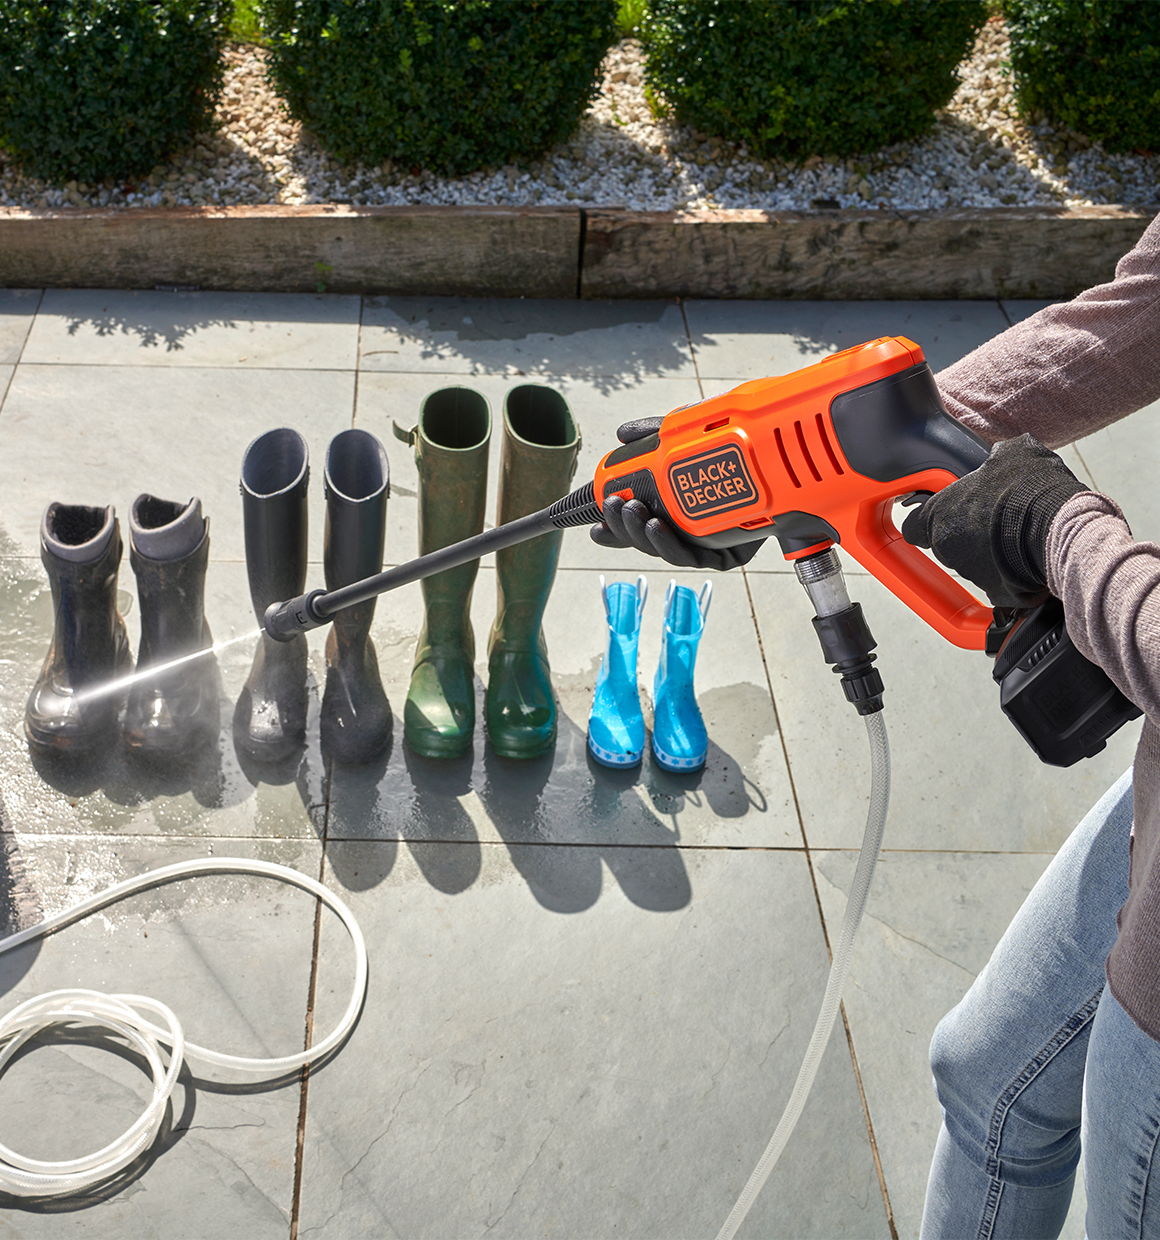 How To Assemble Black+Decker Cordless Pressure Washer 